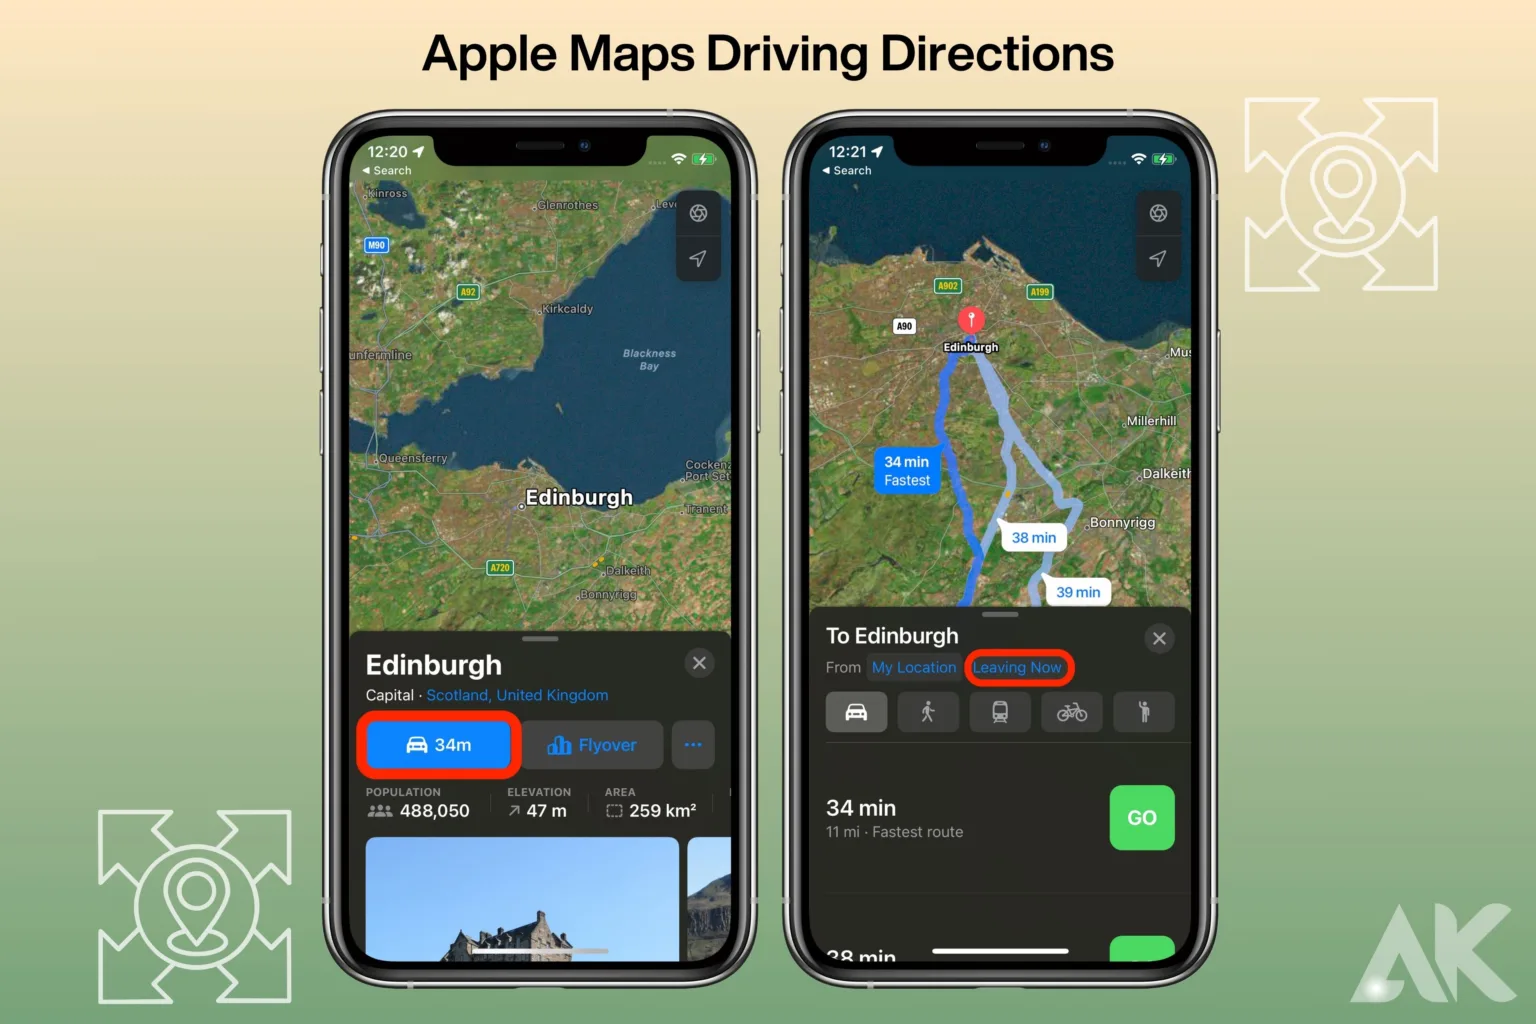 Apple Maps driving directions